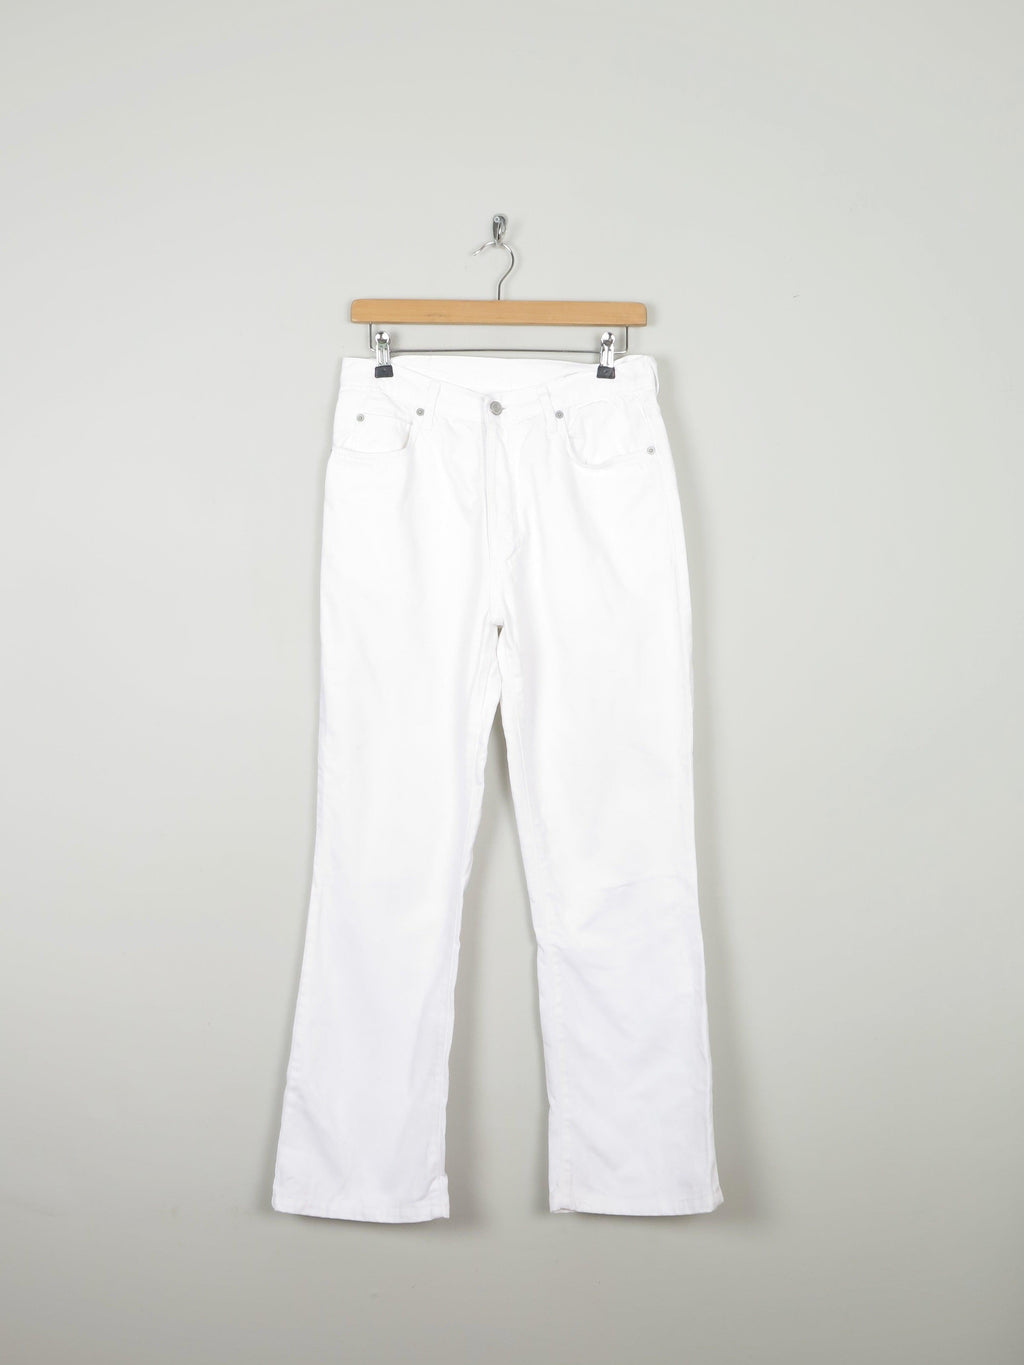 Women's White Vintage Boot Cut Jeans 31"30L 10/12 - The Harlequin